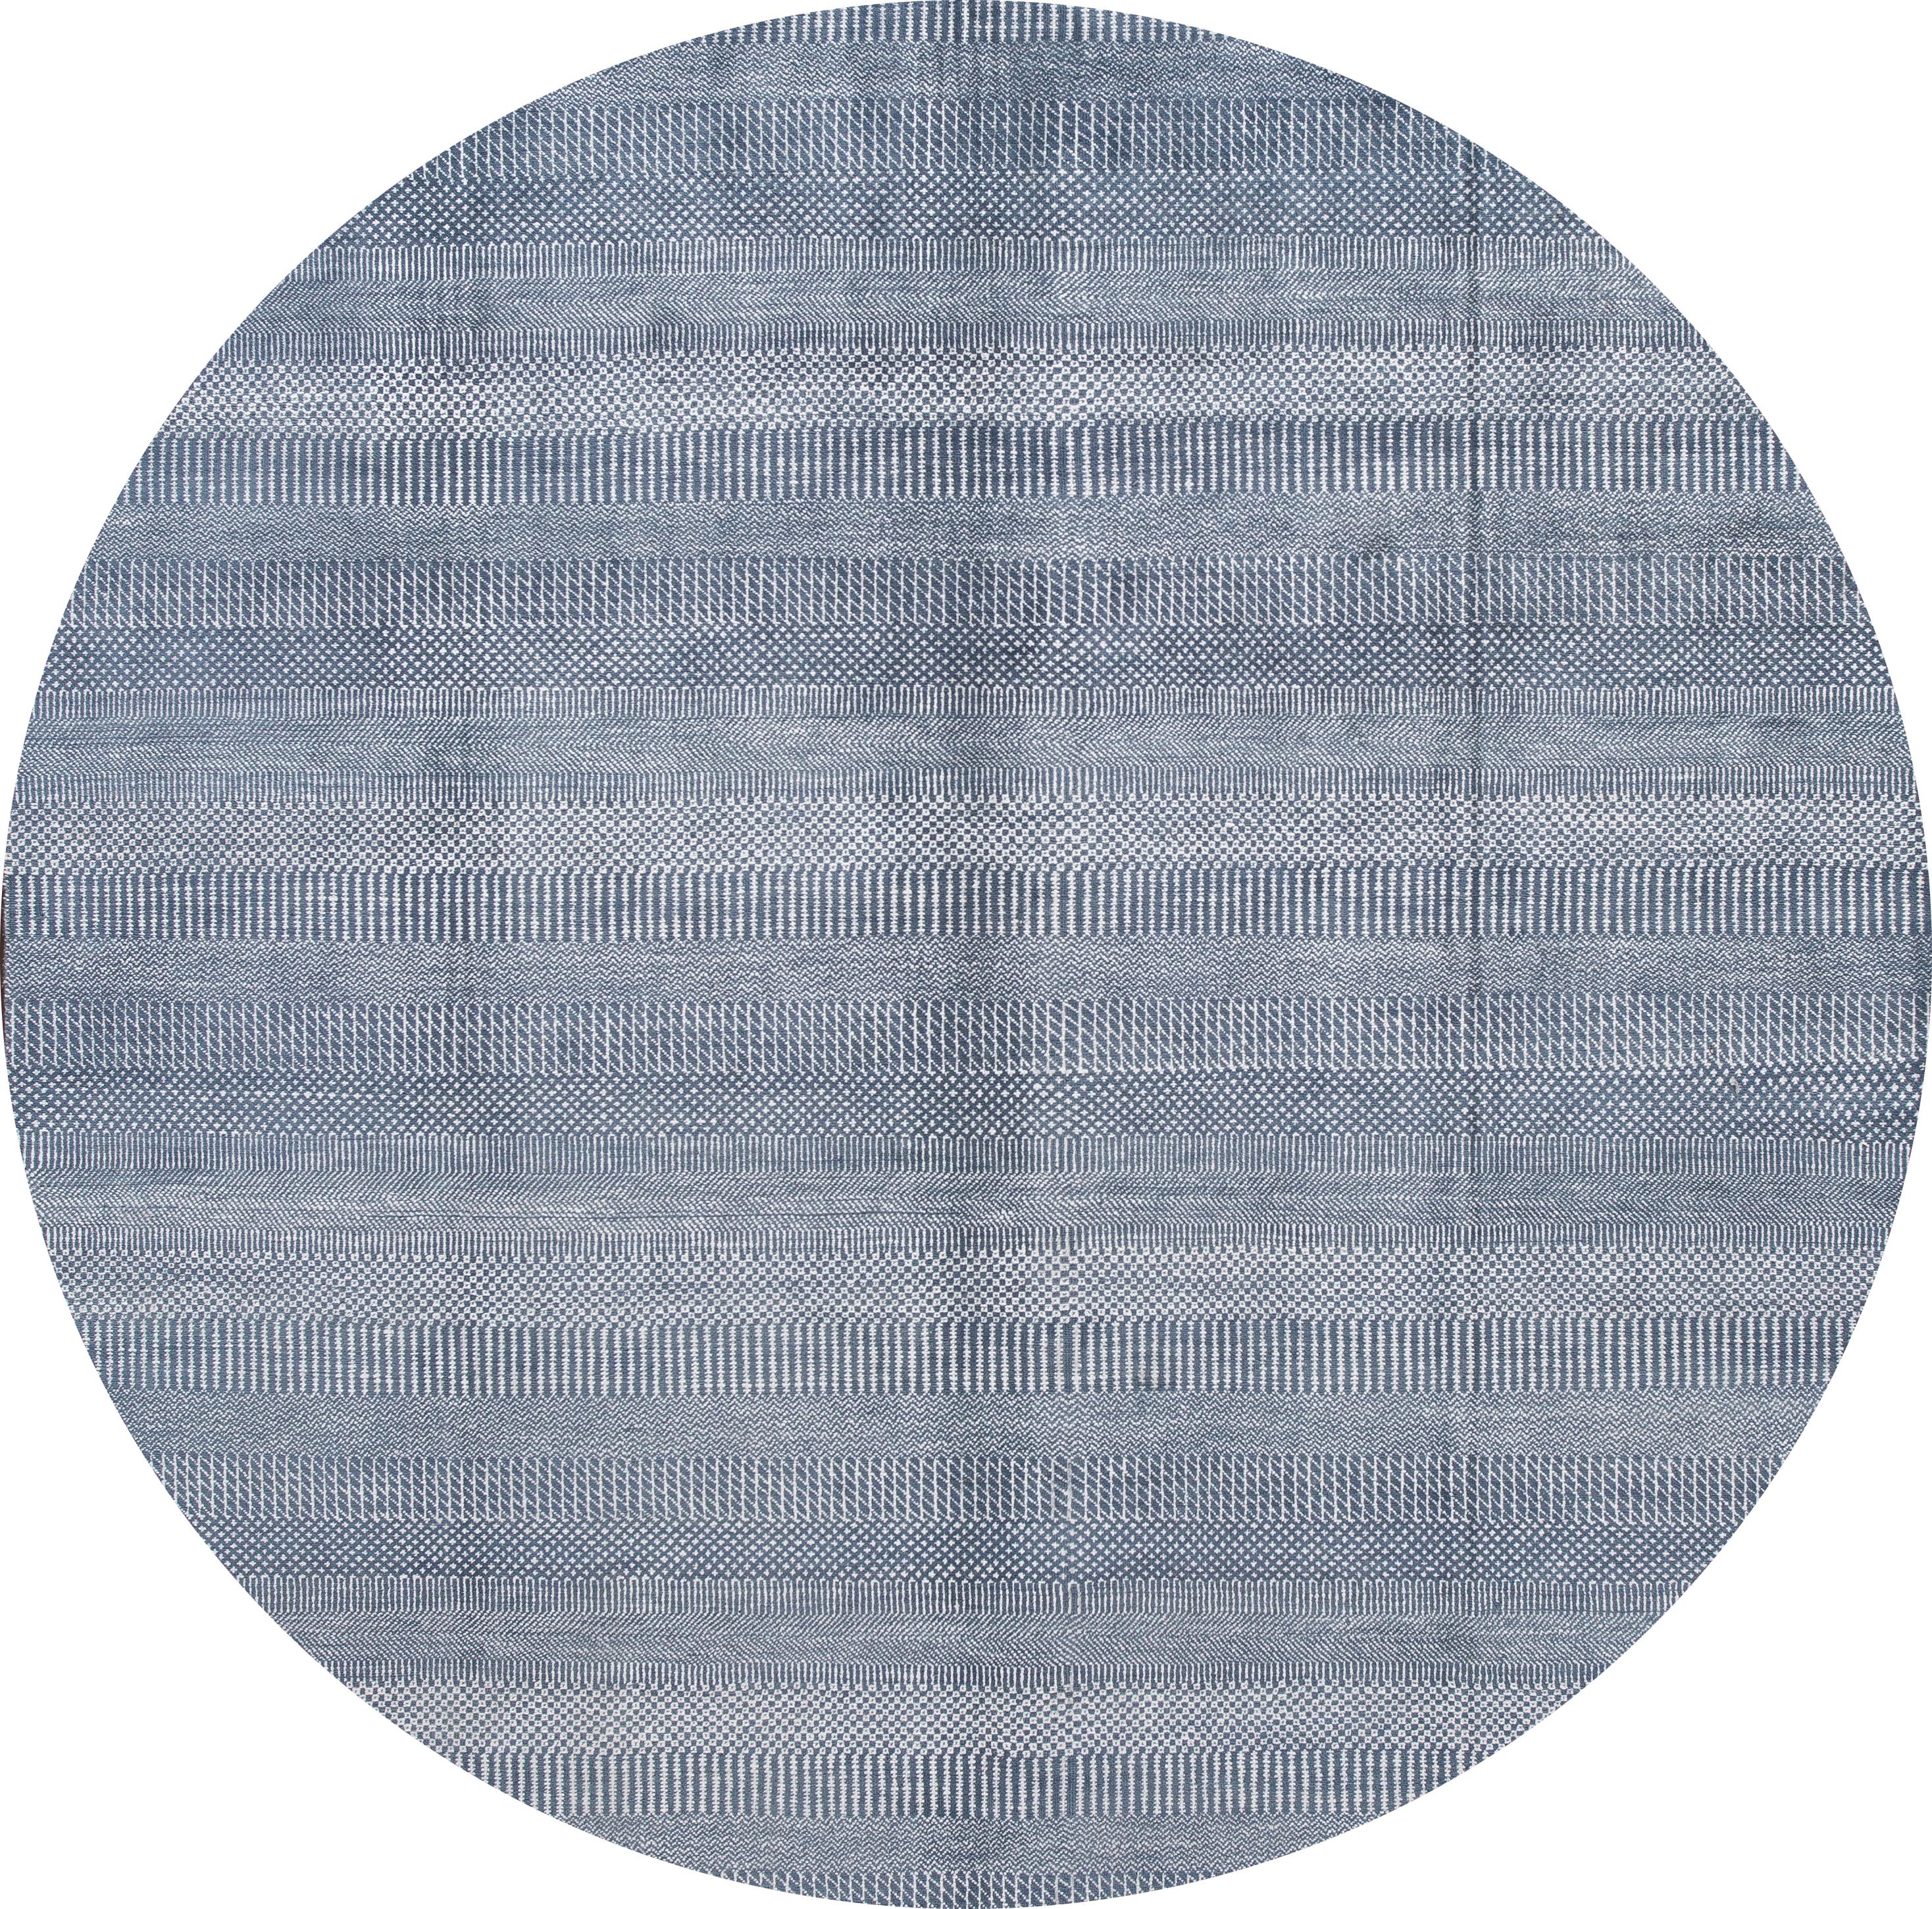 A beautiful 21st century transitional Savannah rug with a blue field all-over the design.
This rug measures: 8' x 10'.